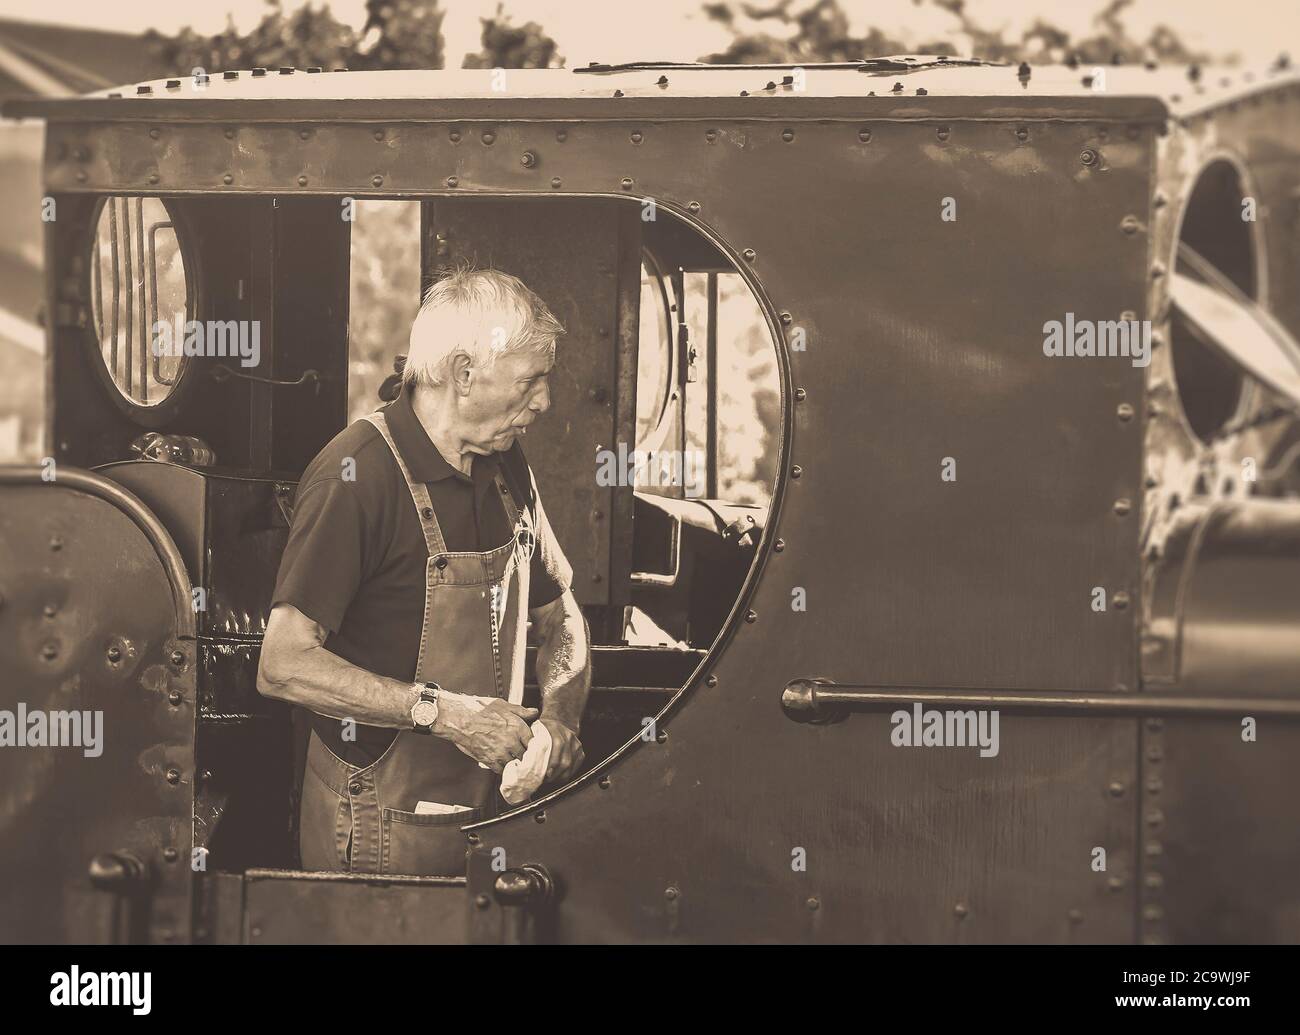 Train Driver High Resolution Stock Photography and Images - Alamy